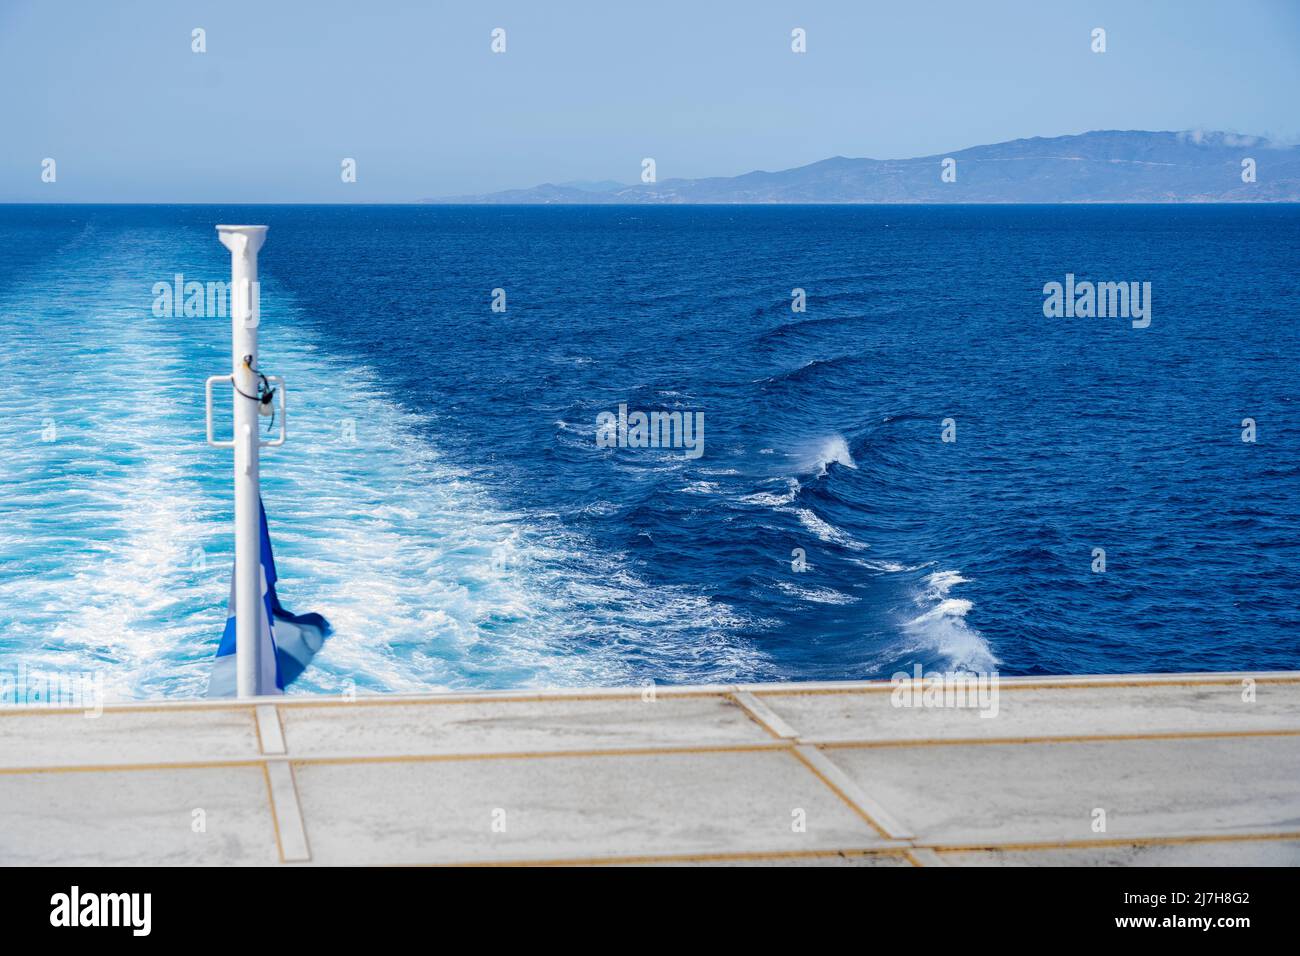 Sailing in ferry boat somewhere in the Aegean sea, in the Cyclades islands, among the islands of Paros, Naxos and Santorini, in Greece, Europe. Stock Photo